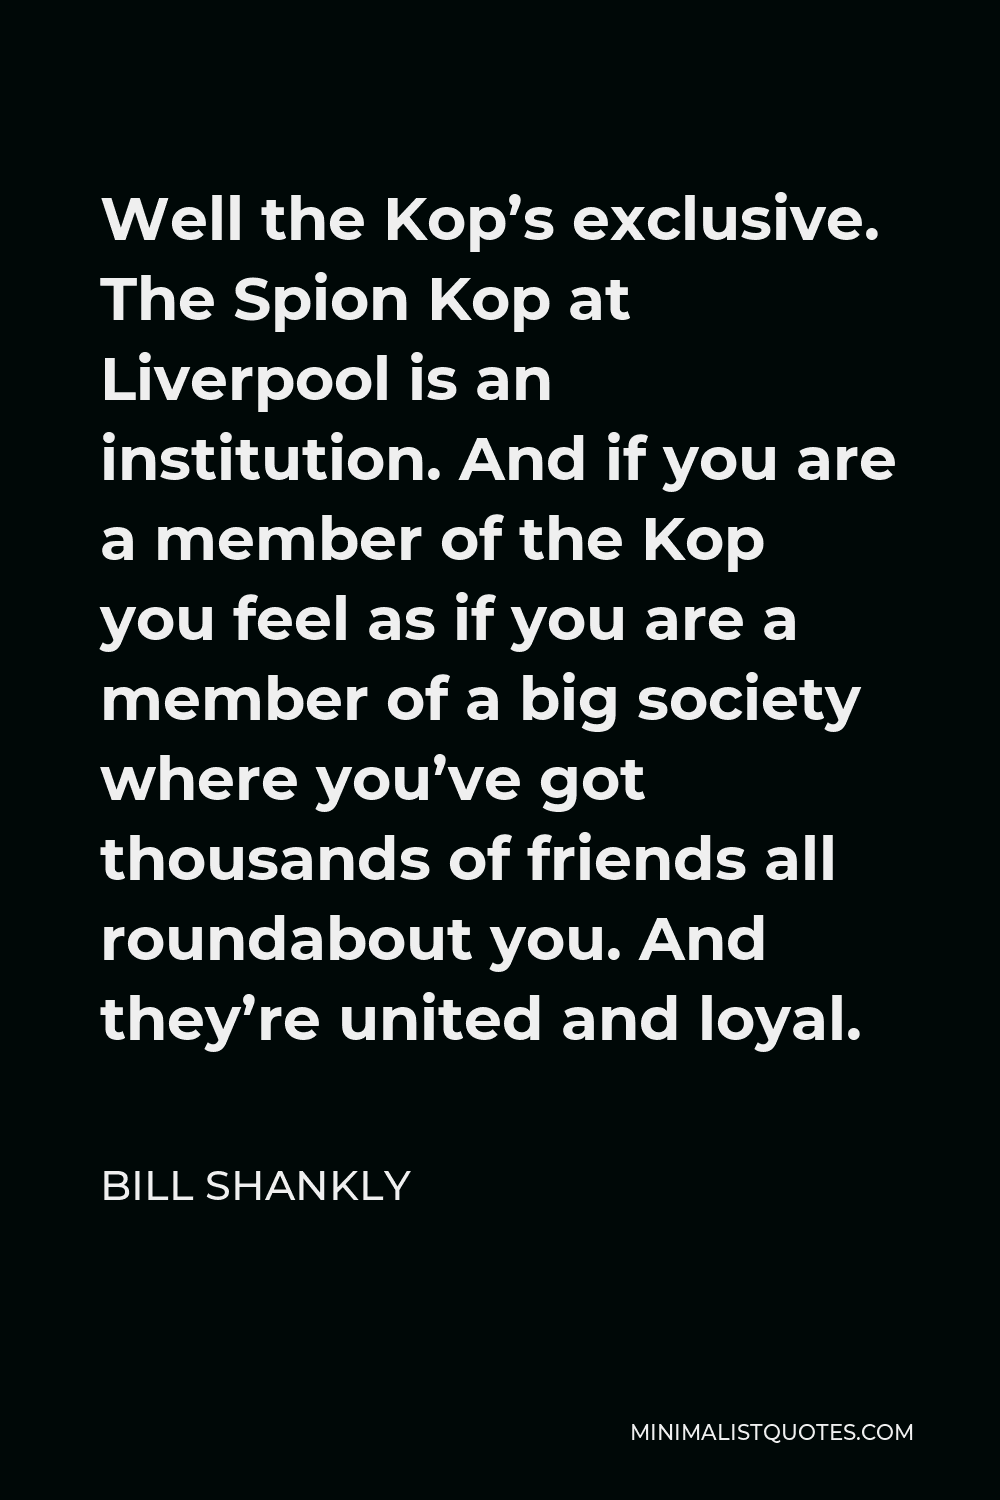 Bill Shankly Quote - Well the Kop’s exclusive. The Spion Kop at Liverpool is an institution. And if you are a member of the Kop you feel as if you are a member of a big society where you’ve got thousands of friends all roundabout you. And they’re united and loyal.